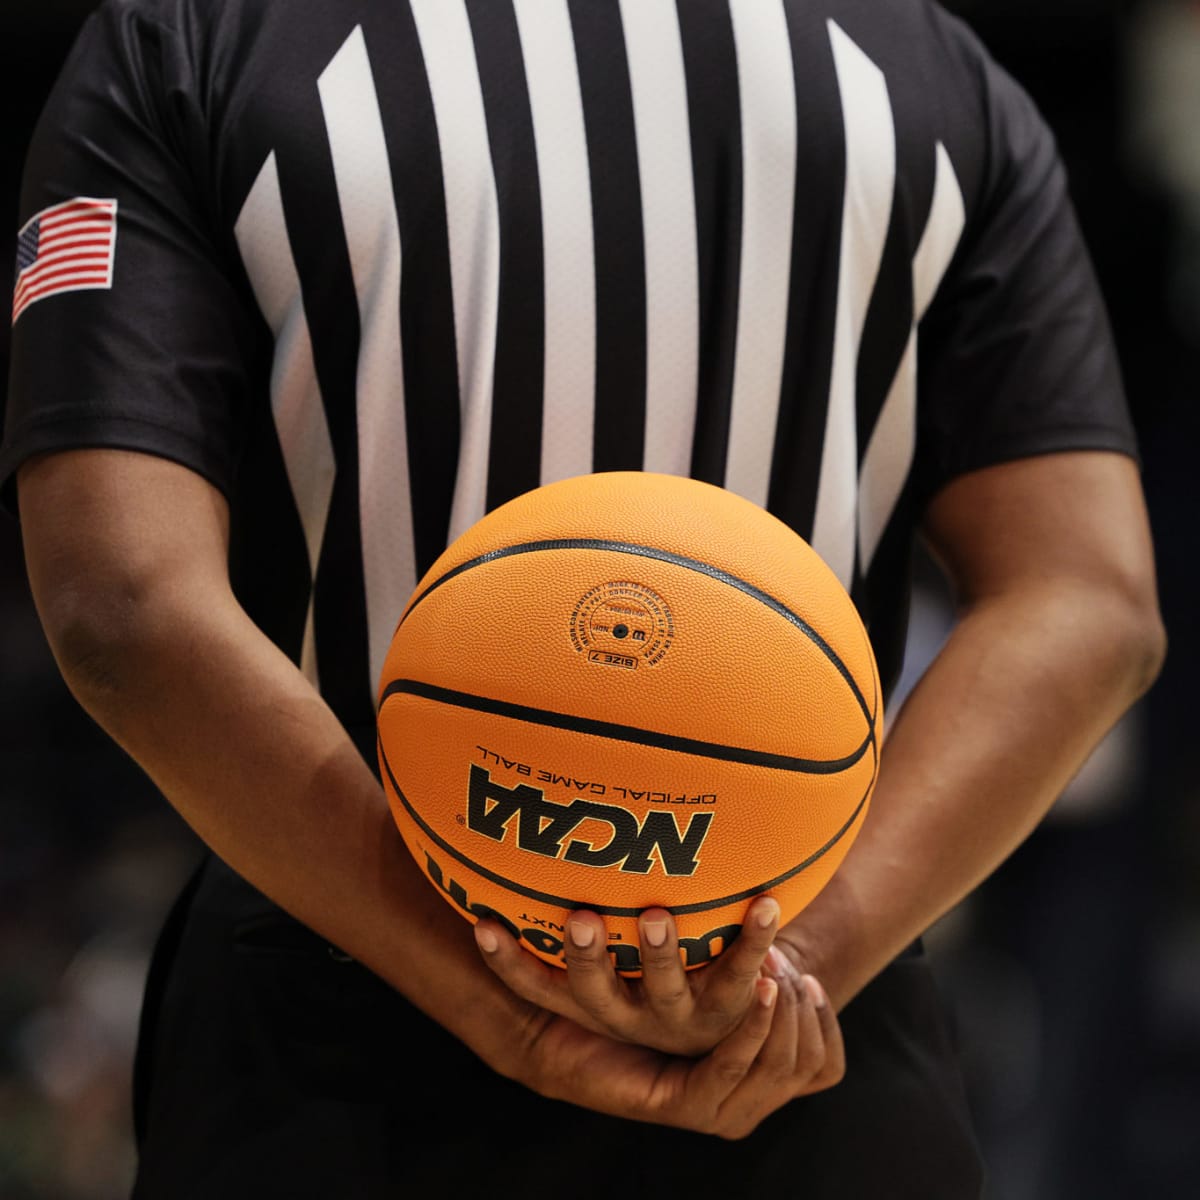 A referee's terrible call spoiled a wild Division III buzzer-beater